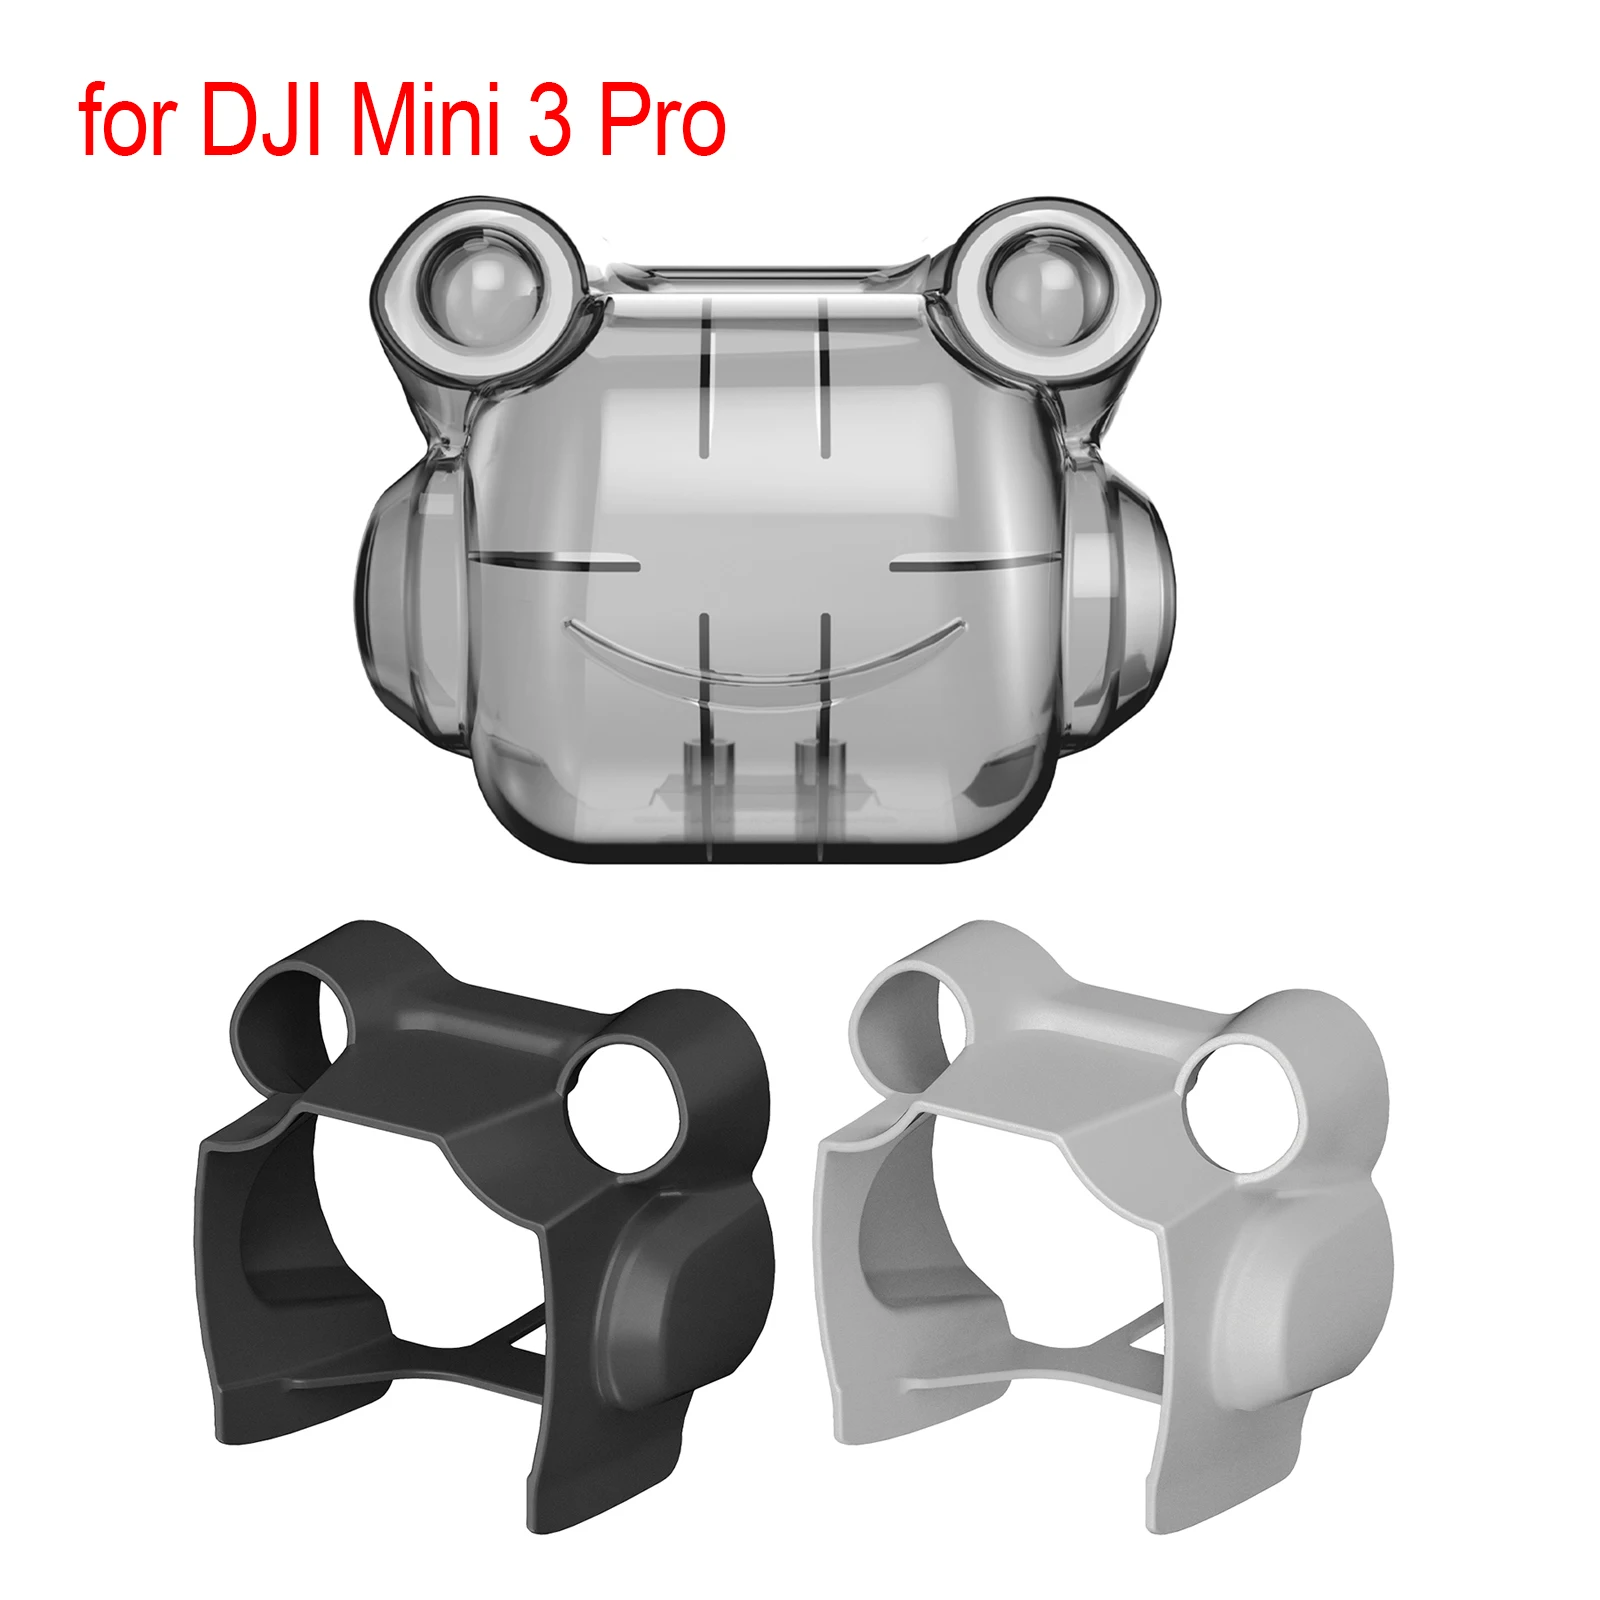 

Lens Cover for DJI Mini 3 Pro Frog Lens Cover Gimbal Protection Vision Sensor Integrated Cover Gimbal Camera Guard Props Fixer